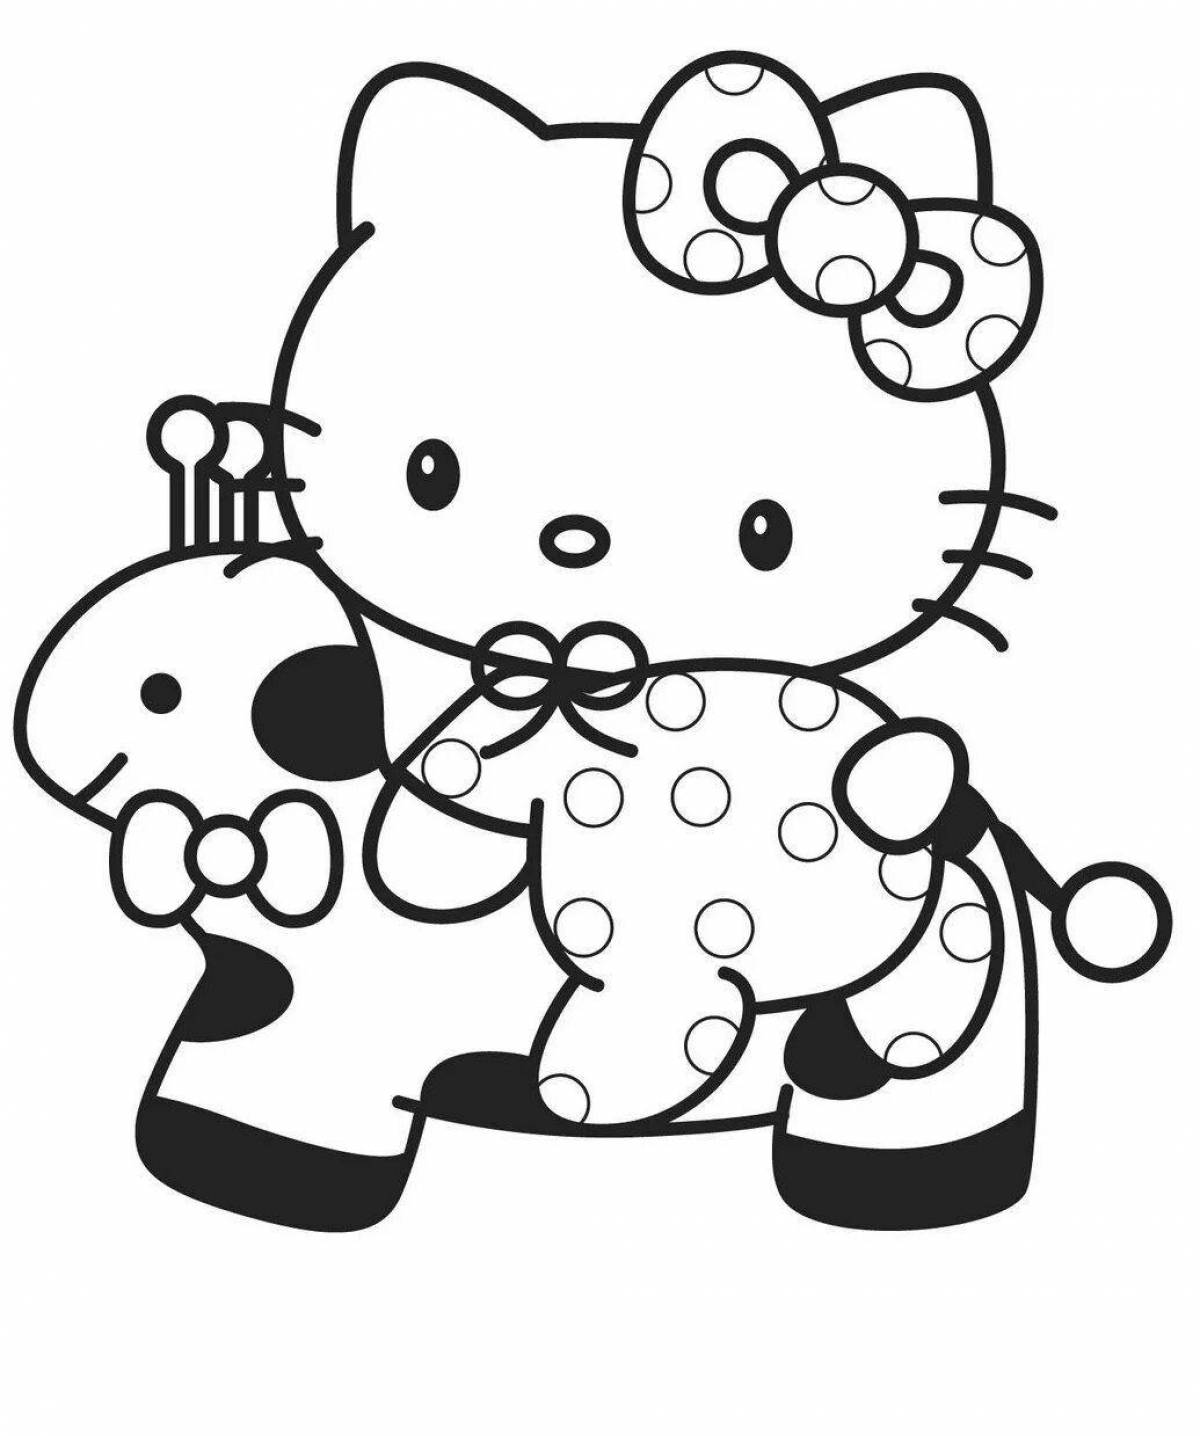 Colorful hello kitty punk coloring book